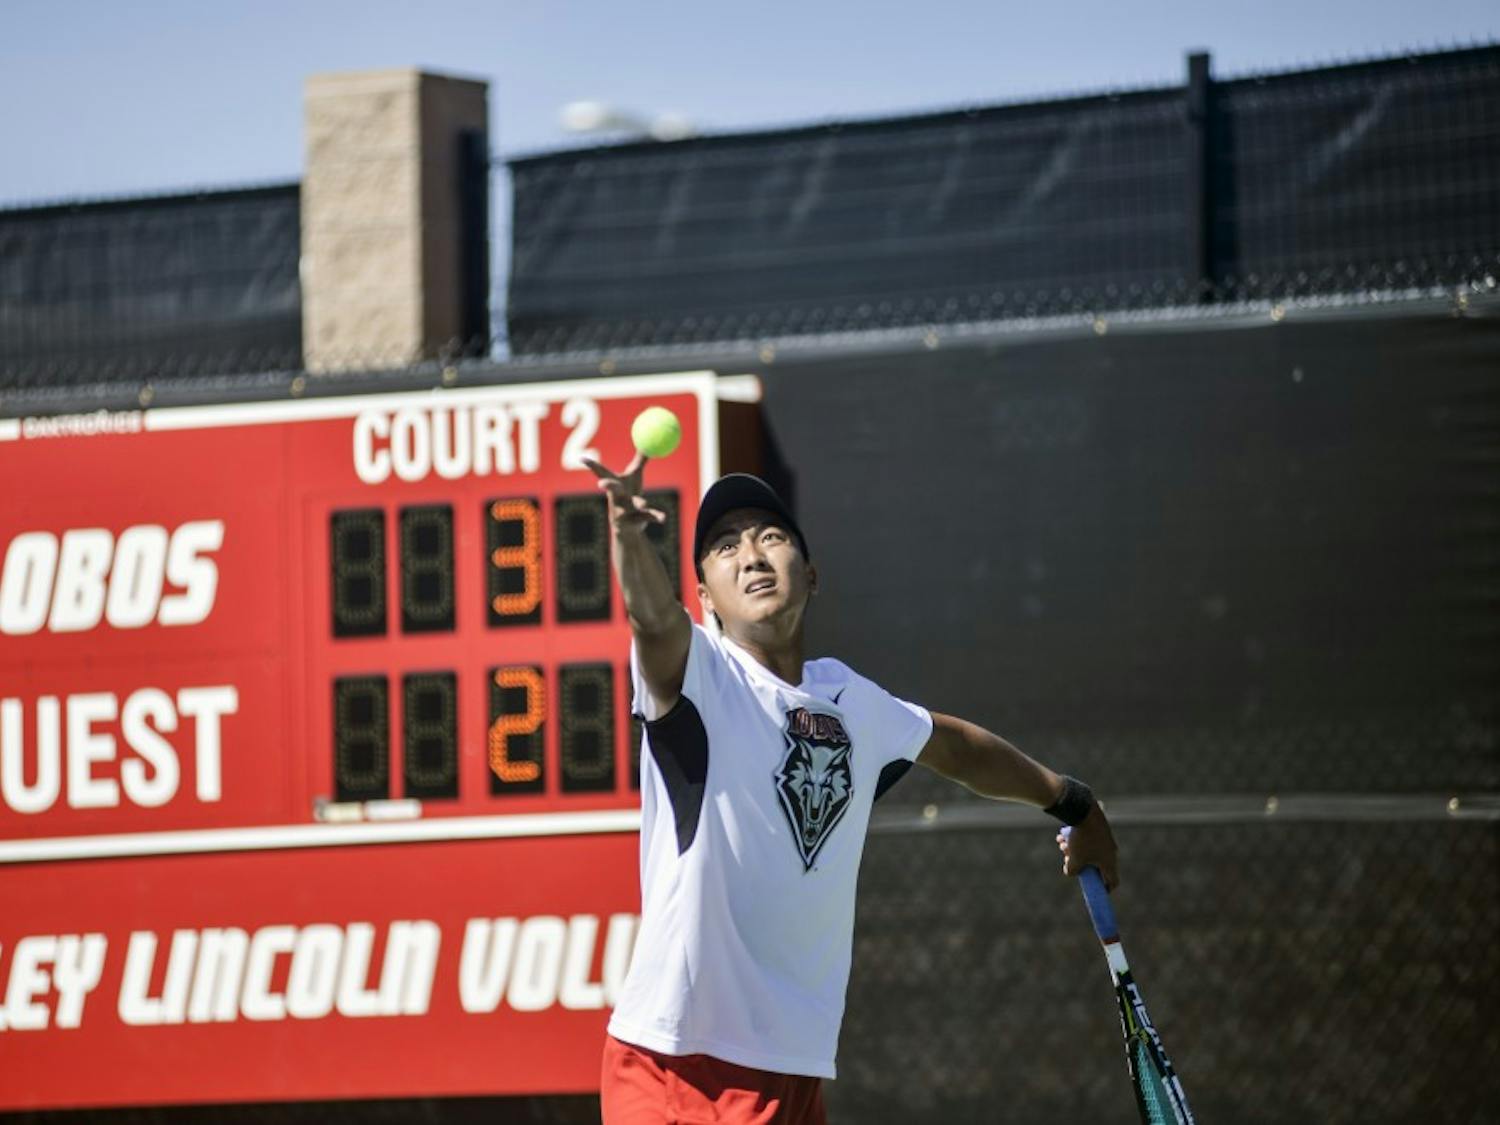 Lobos Augustus Ge sets up his serve during the Balloon Fiesta Invitational Oct. 9. The invitational was held at the McKinnon Family Tennis Center and lasted three days with singles and doubles matches.